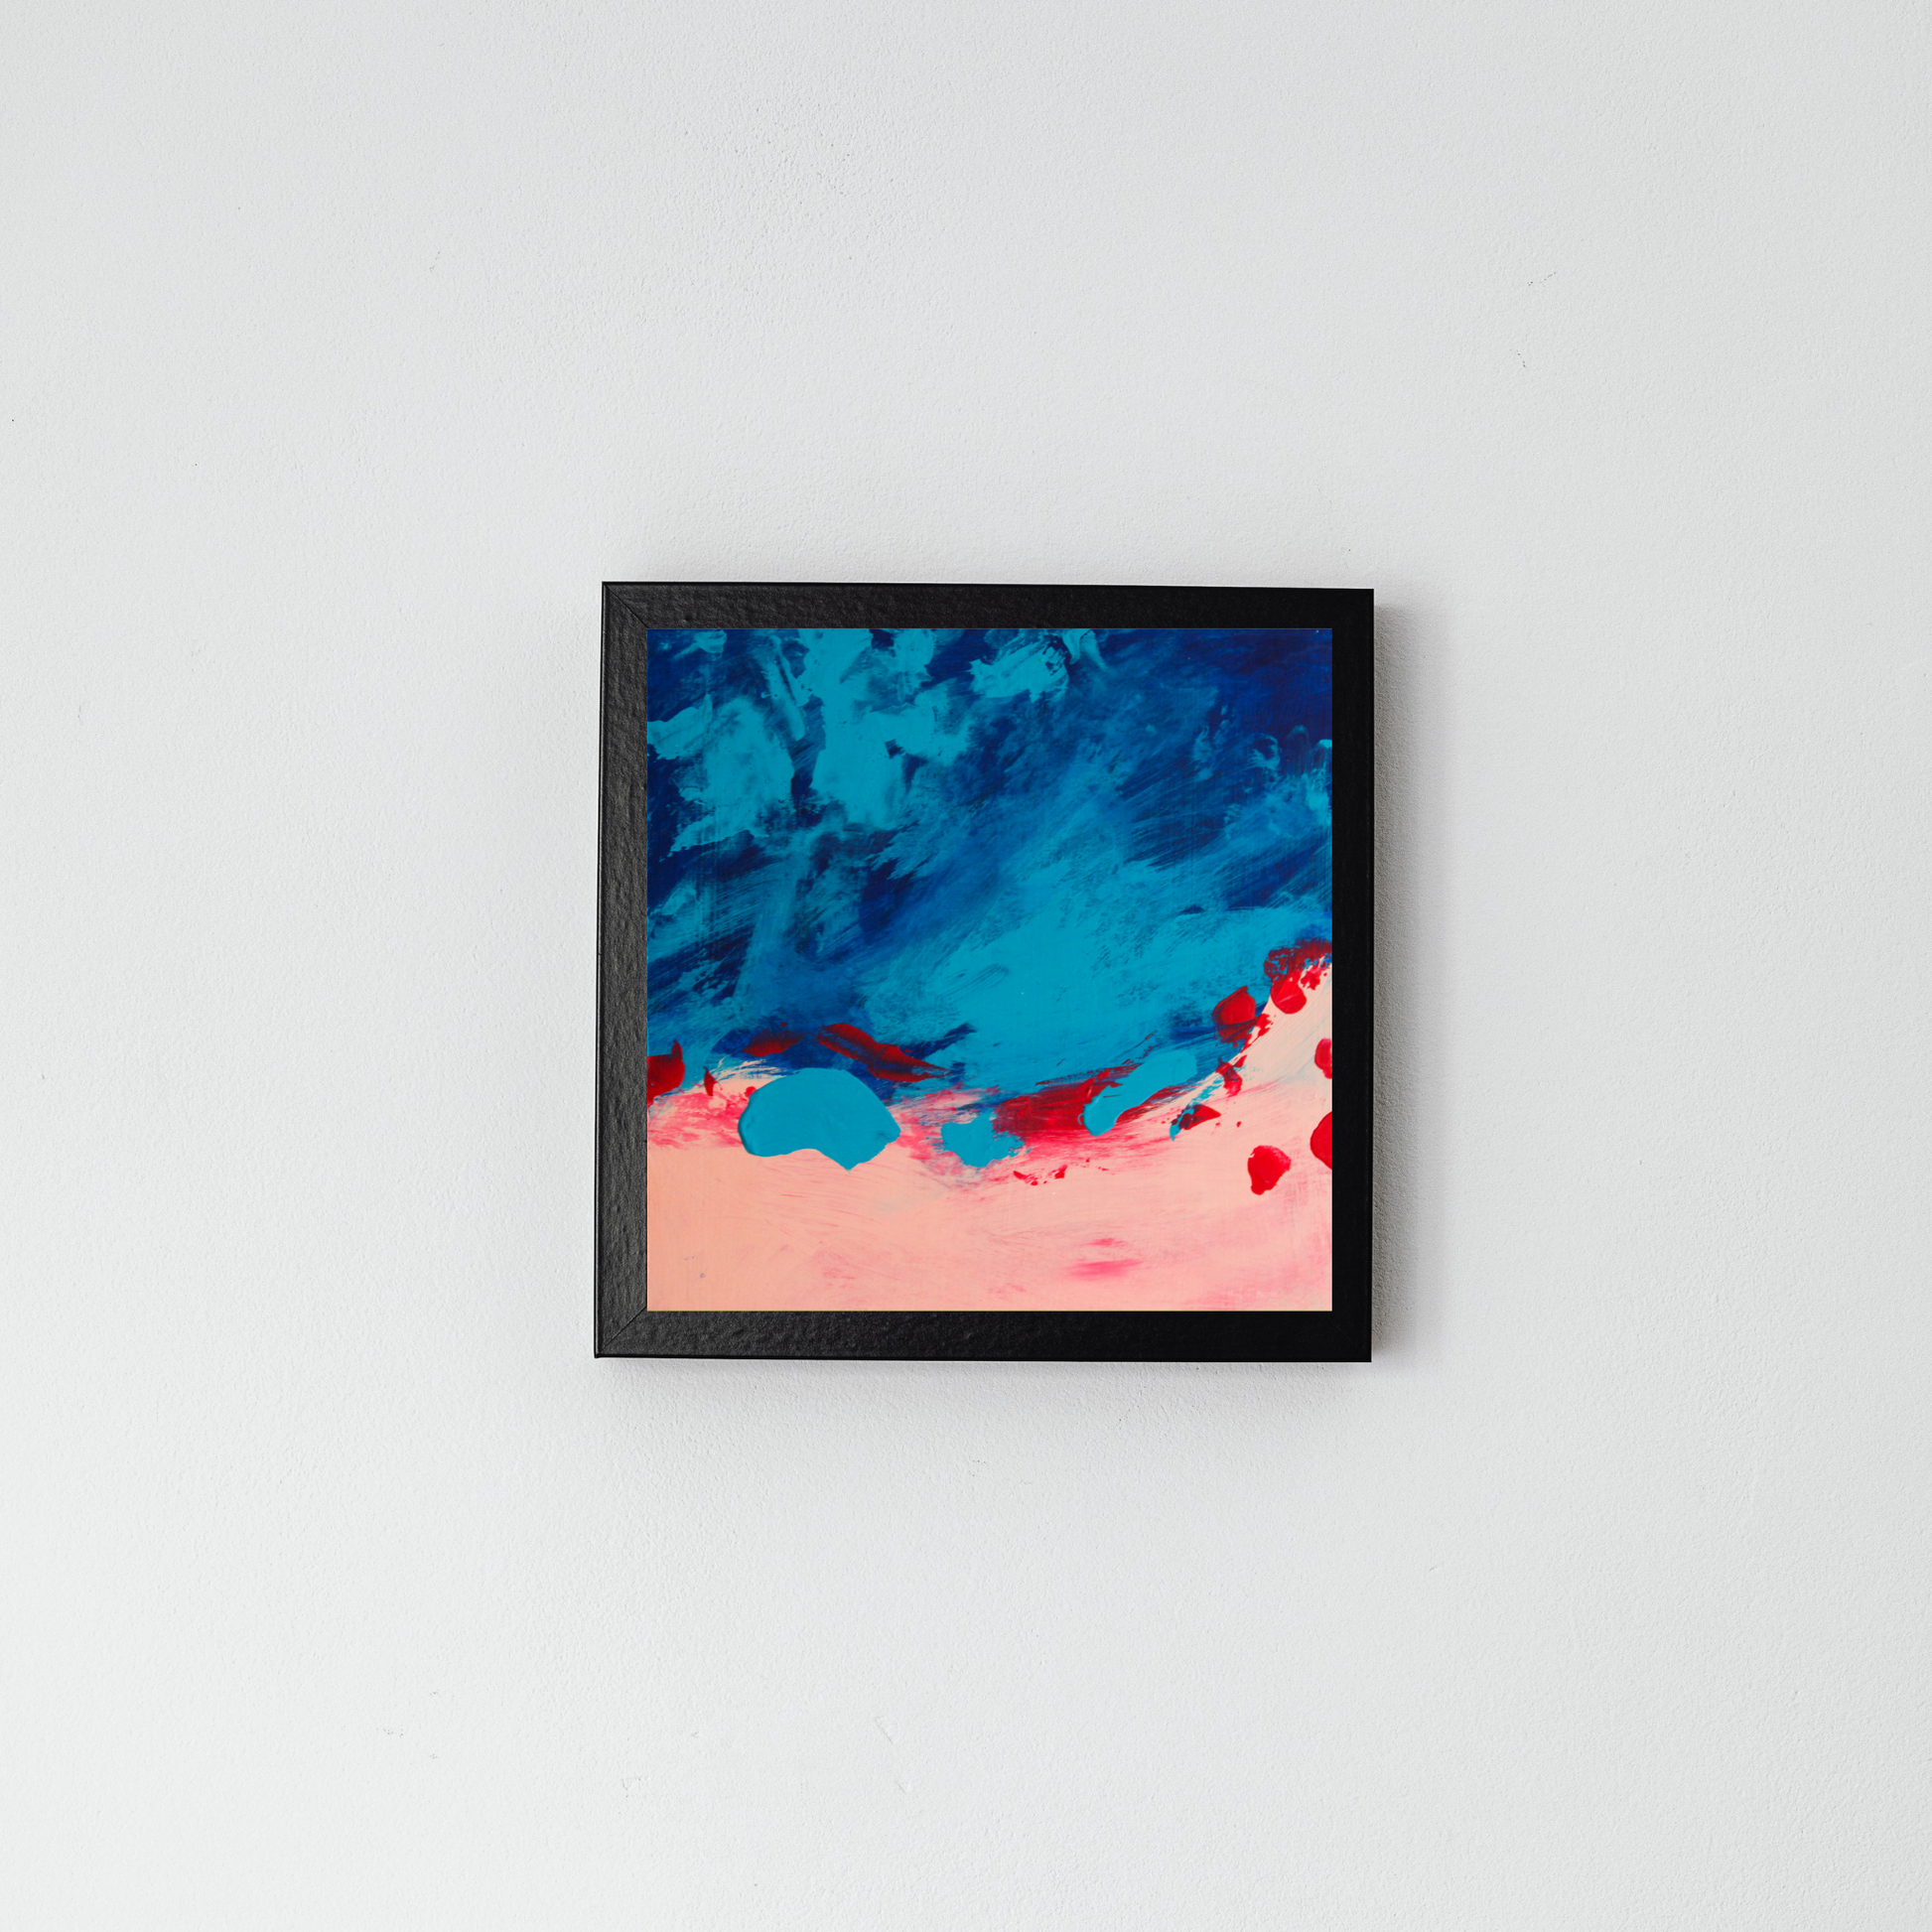 On a grey wall in a black frame is a square blue abstract with pink on the bottom blending into the blue with some red swatches.